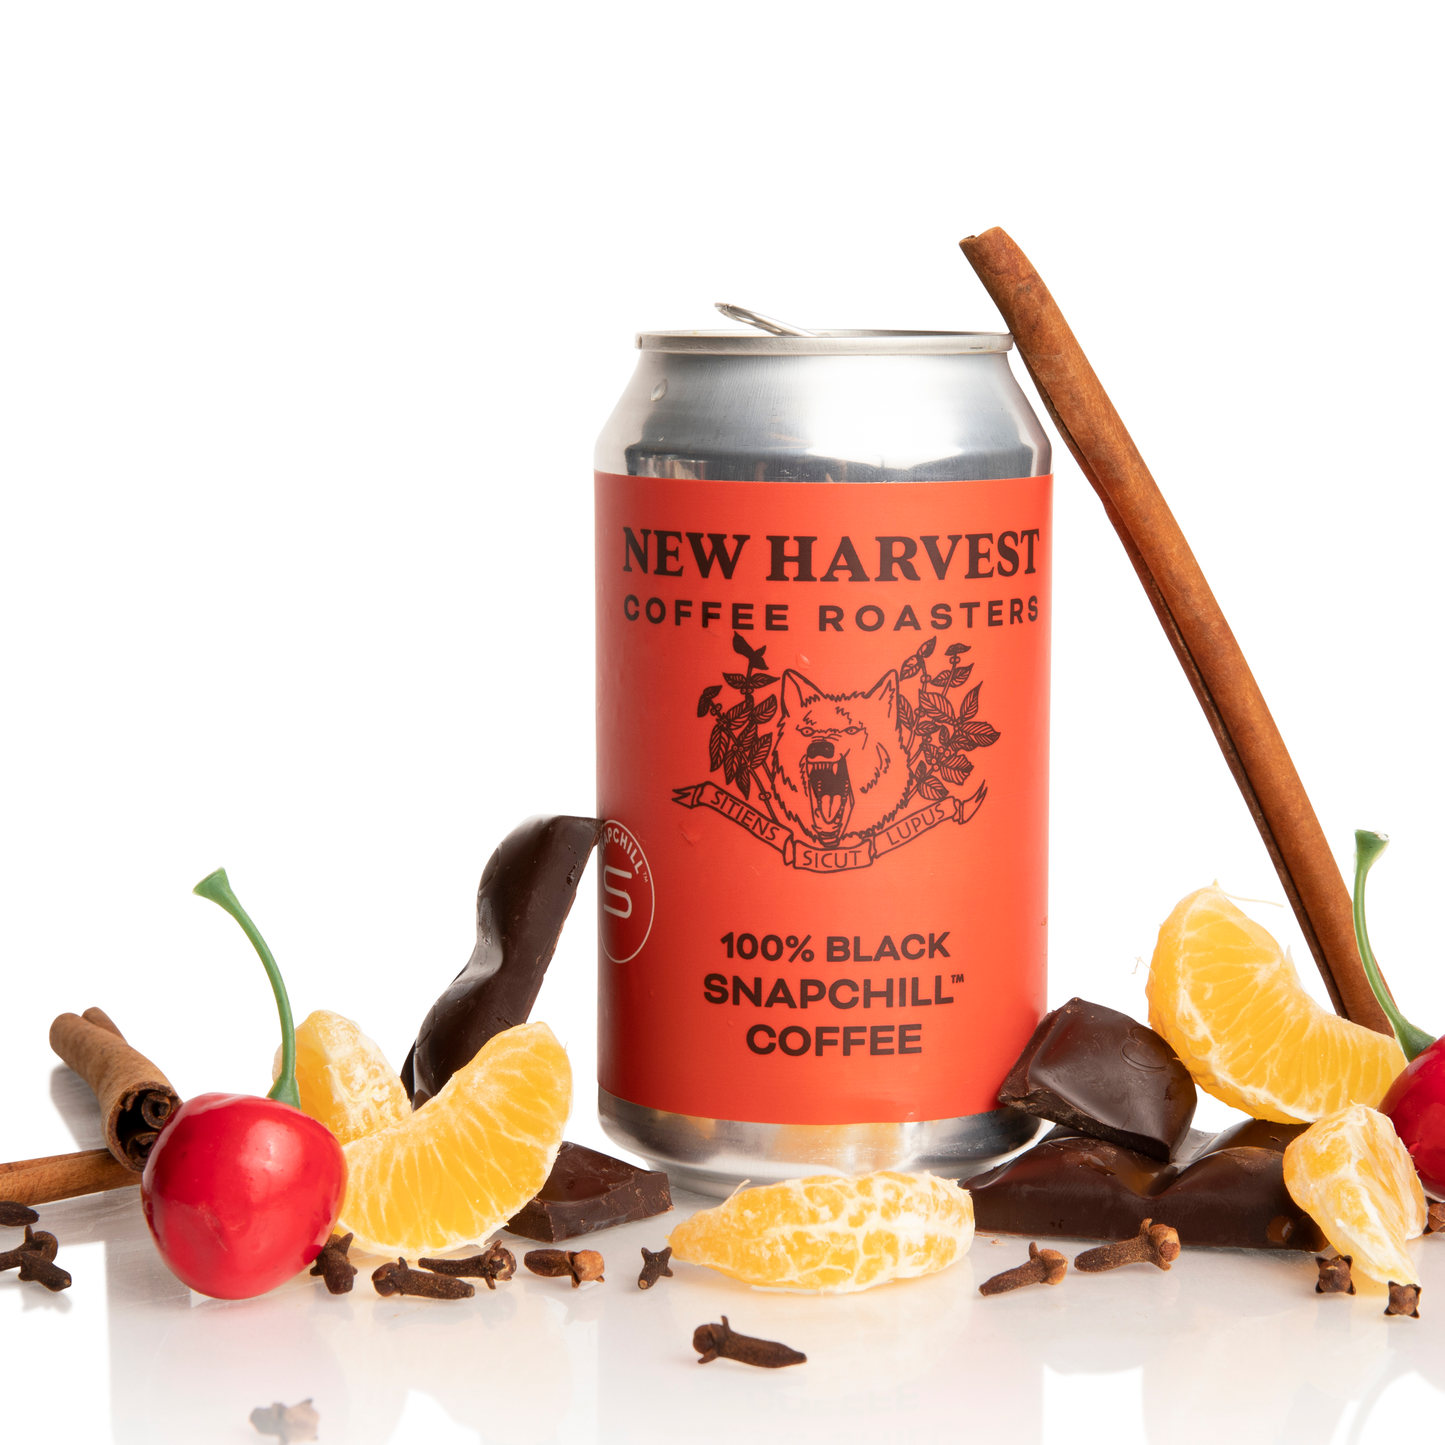 New Harvest - "Wolf Can" - Wholesale Case Pack